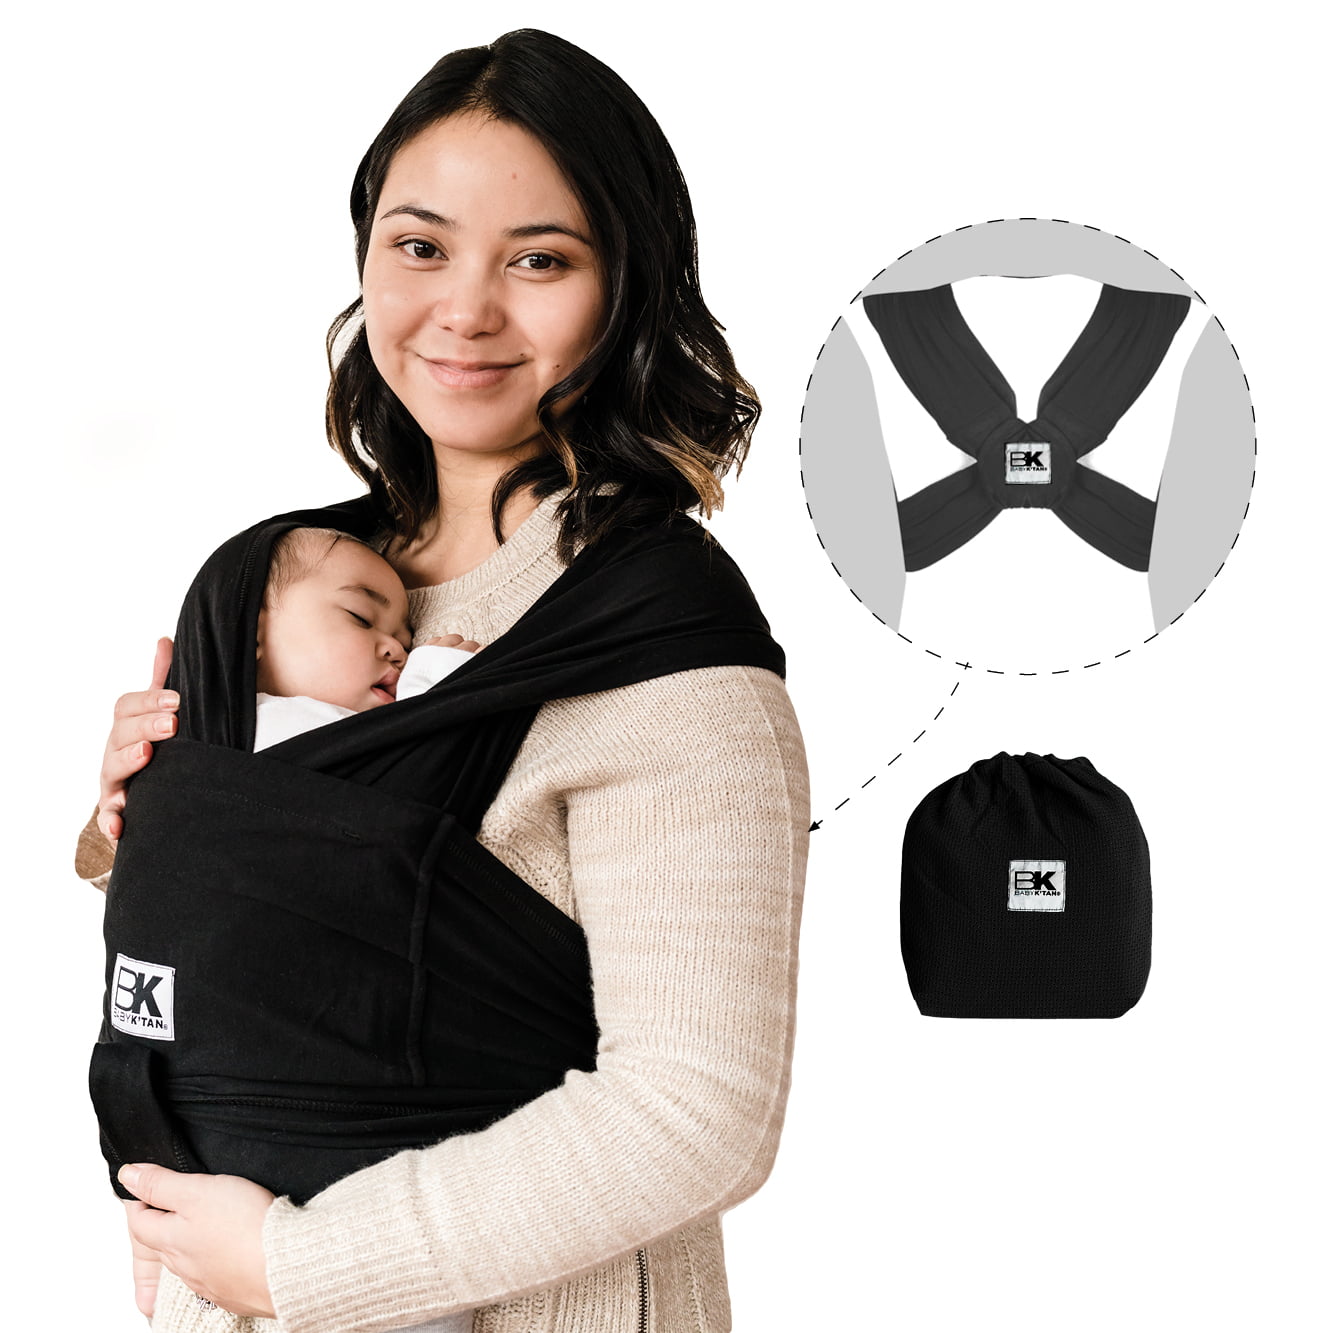 Newborn up to 35 Pound Best for Babywearing. Men 47-52 Women 22-24 Infant and Child Sling-Charcoal Stripe Baby Ktan Print Baby Wrap Carrier X-Large 